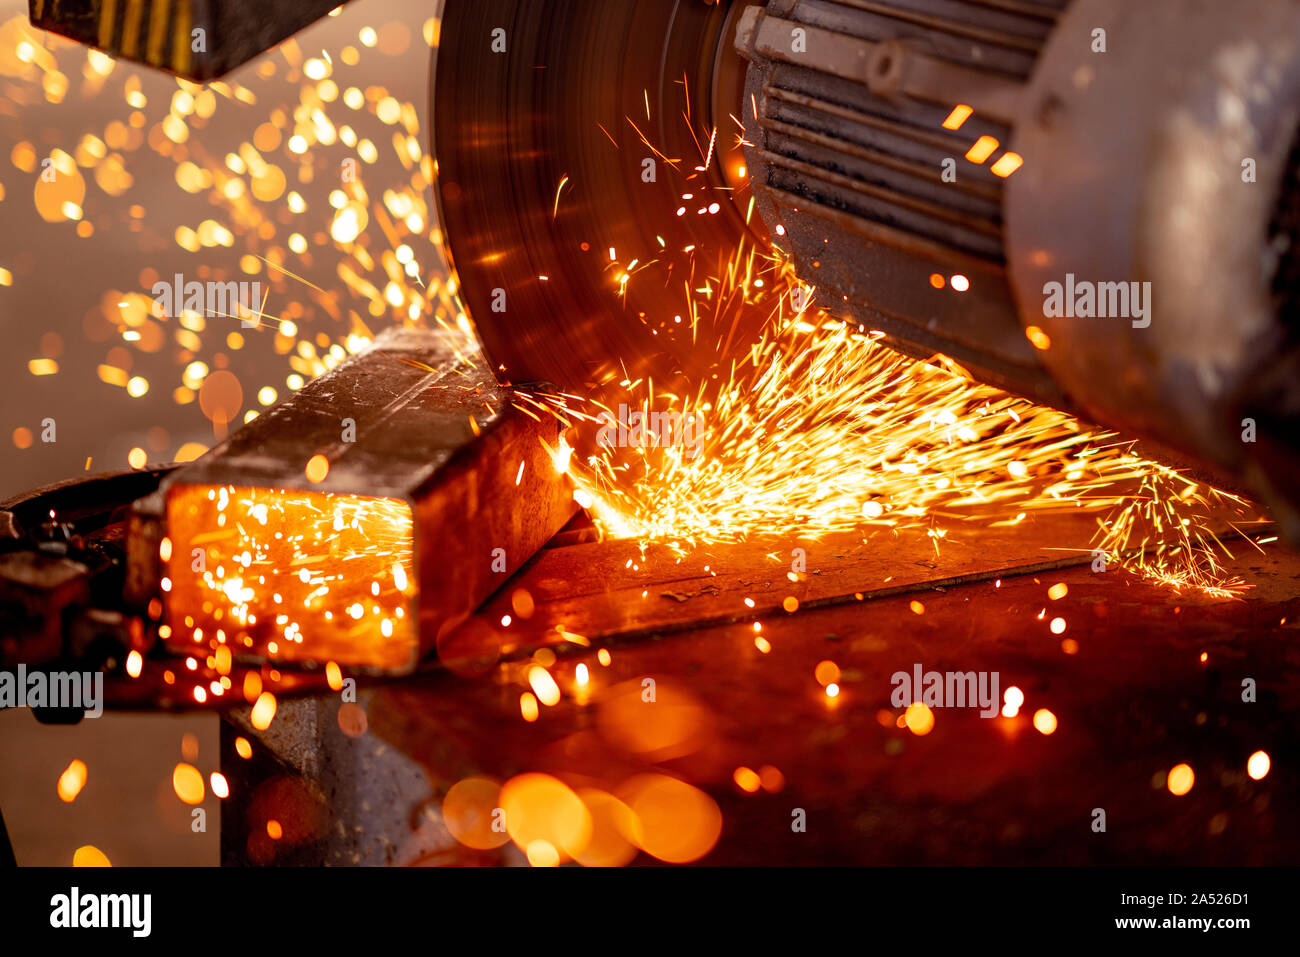 Cutting industrial metal with grinder. Sparks while grinding iron. Stock Photo